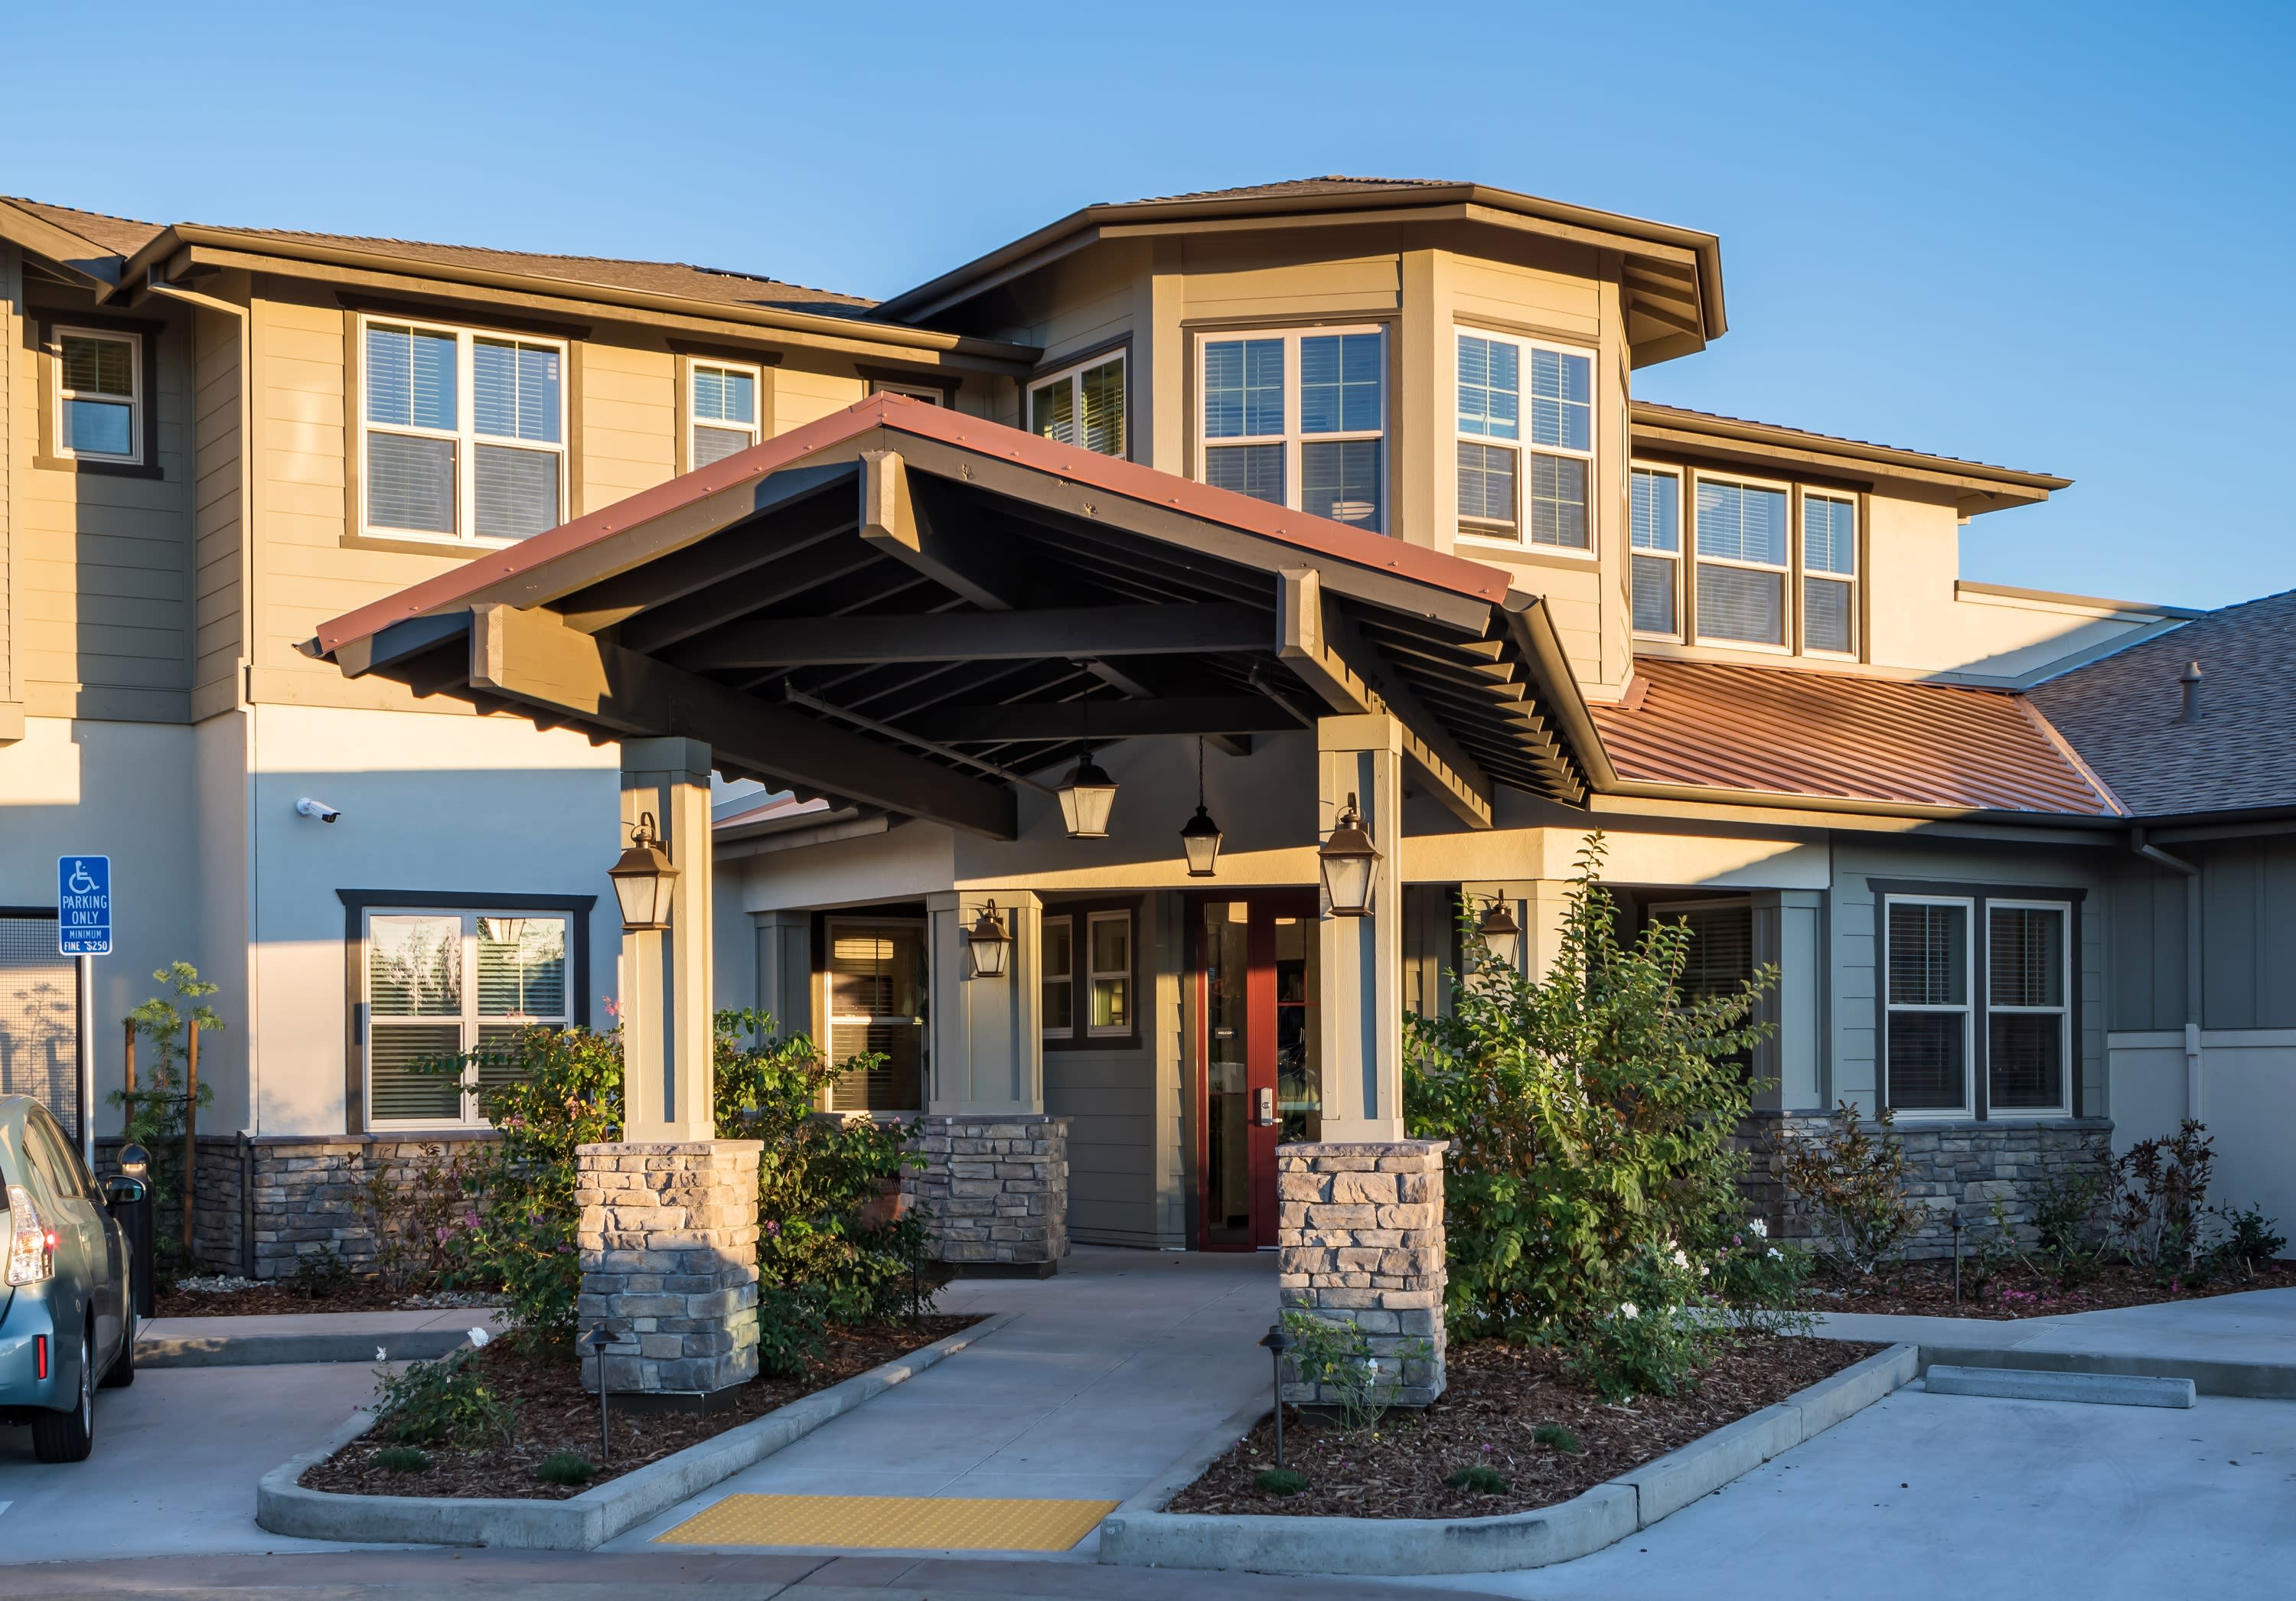 CountryHouse Residence for Memory Care at Granite Bay community exterior